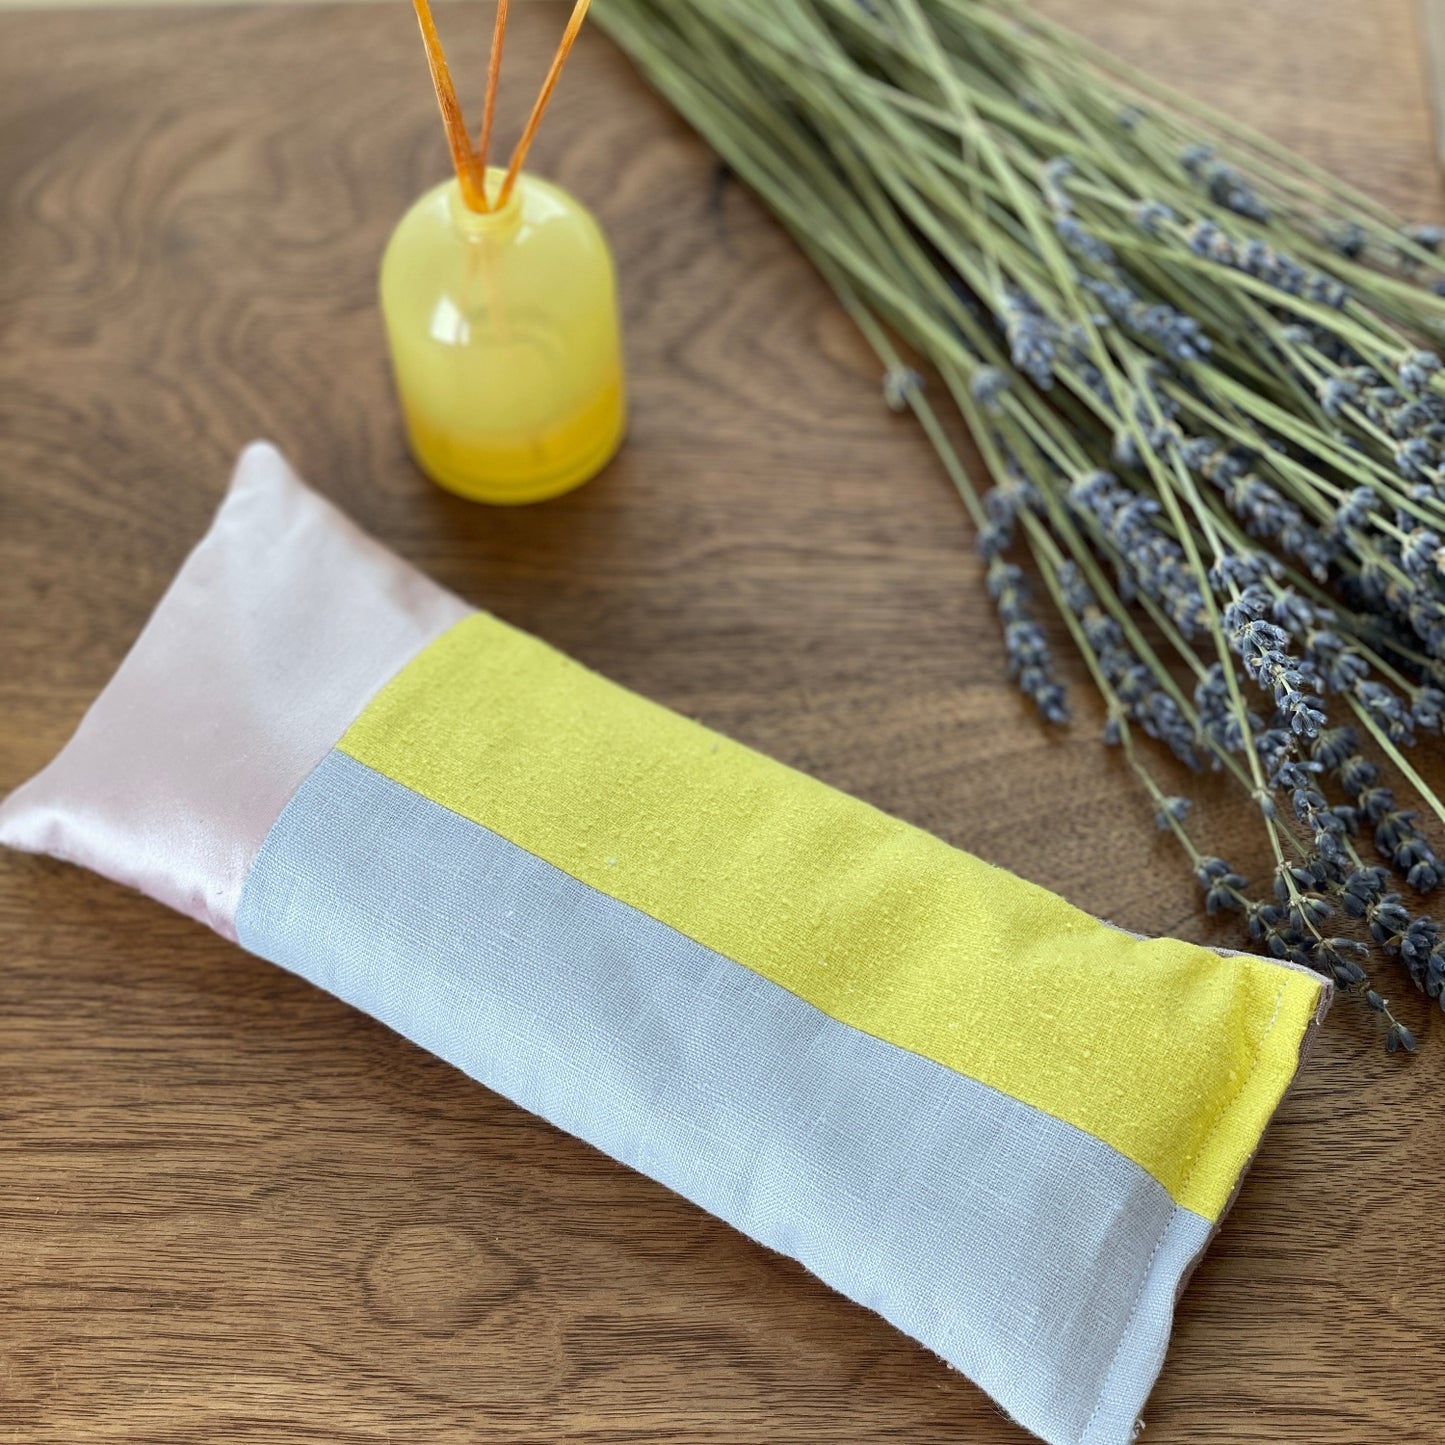 Aromatherapy Weighted Eye Pillow on table with lavender sprigs and yellow diffuser